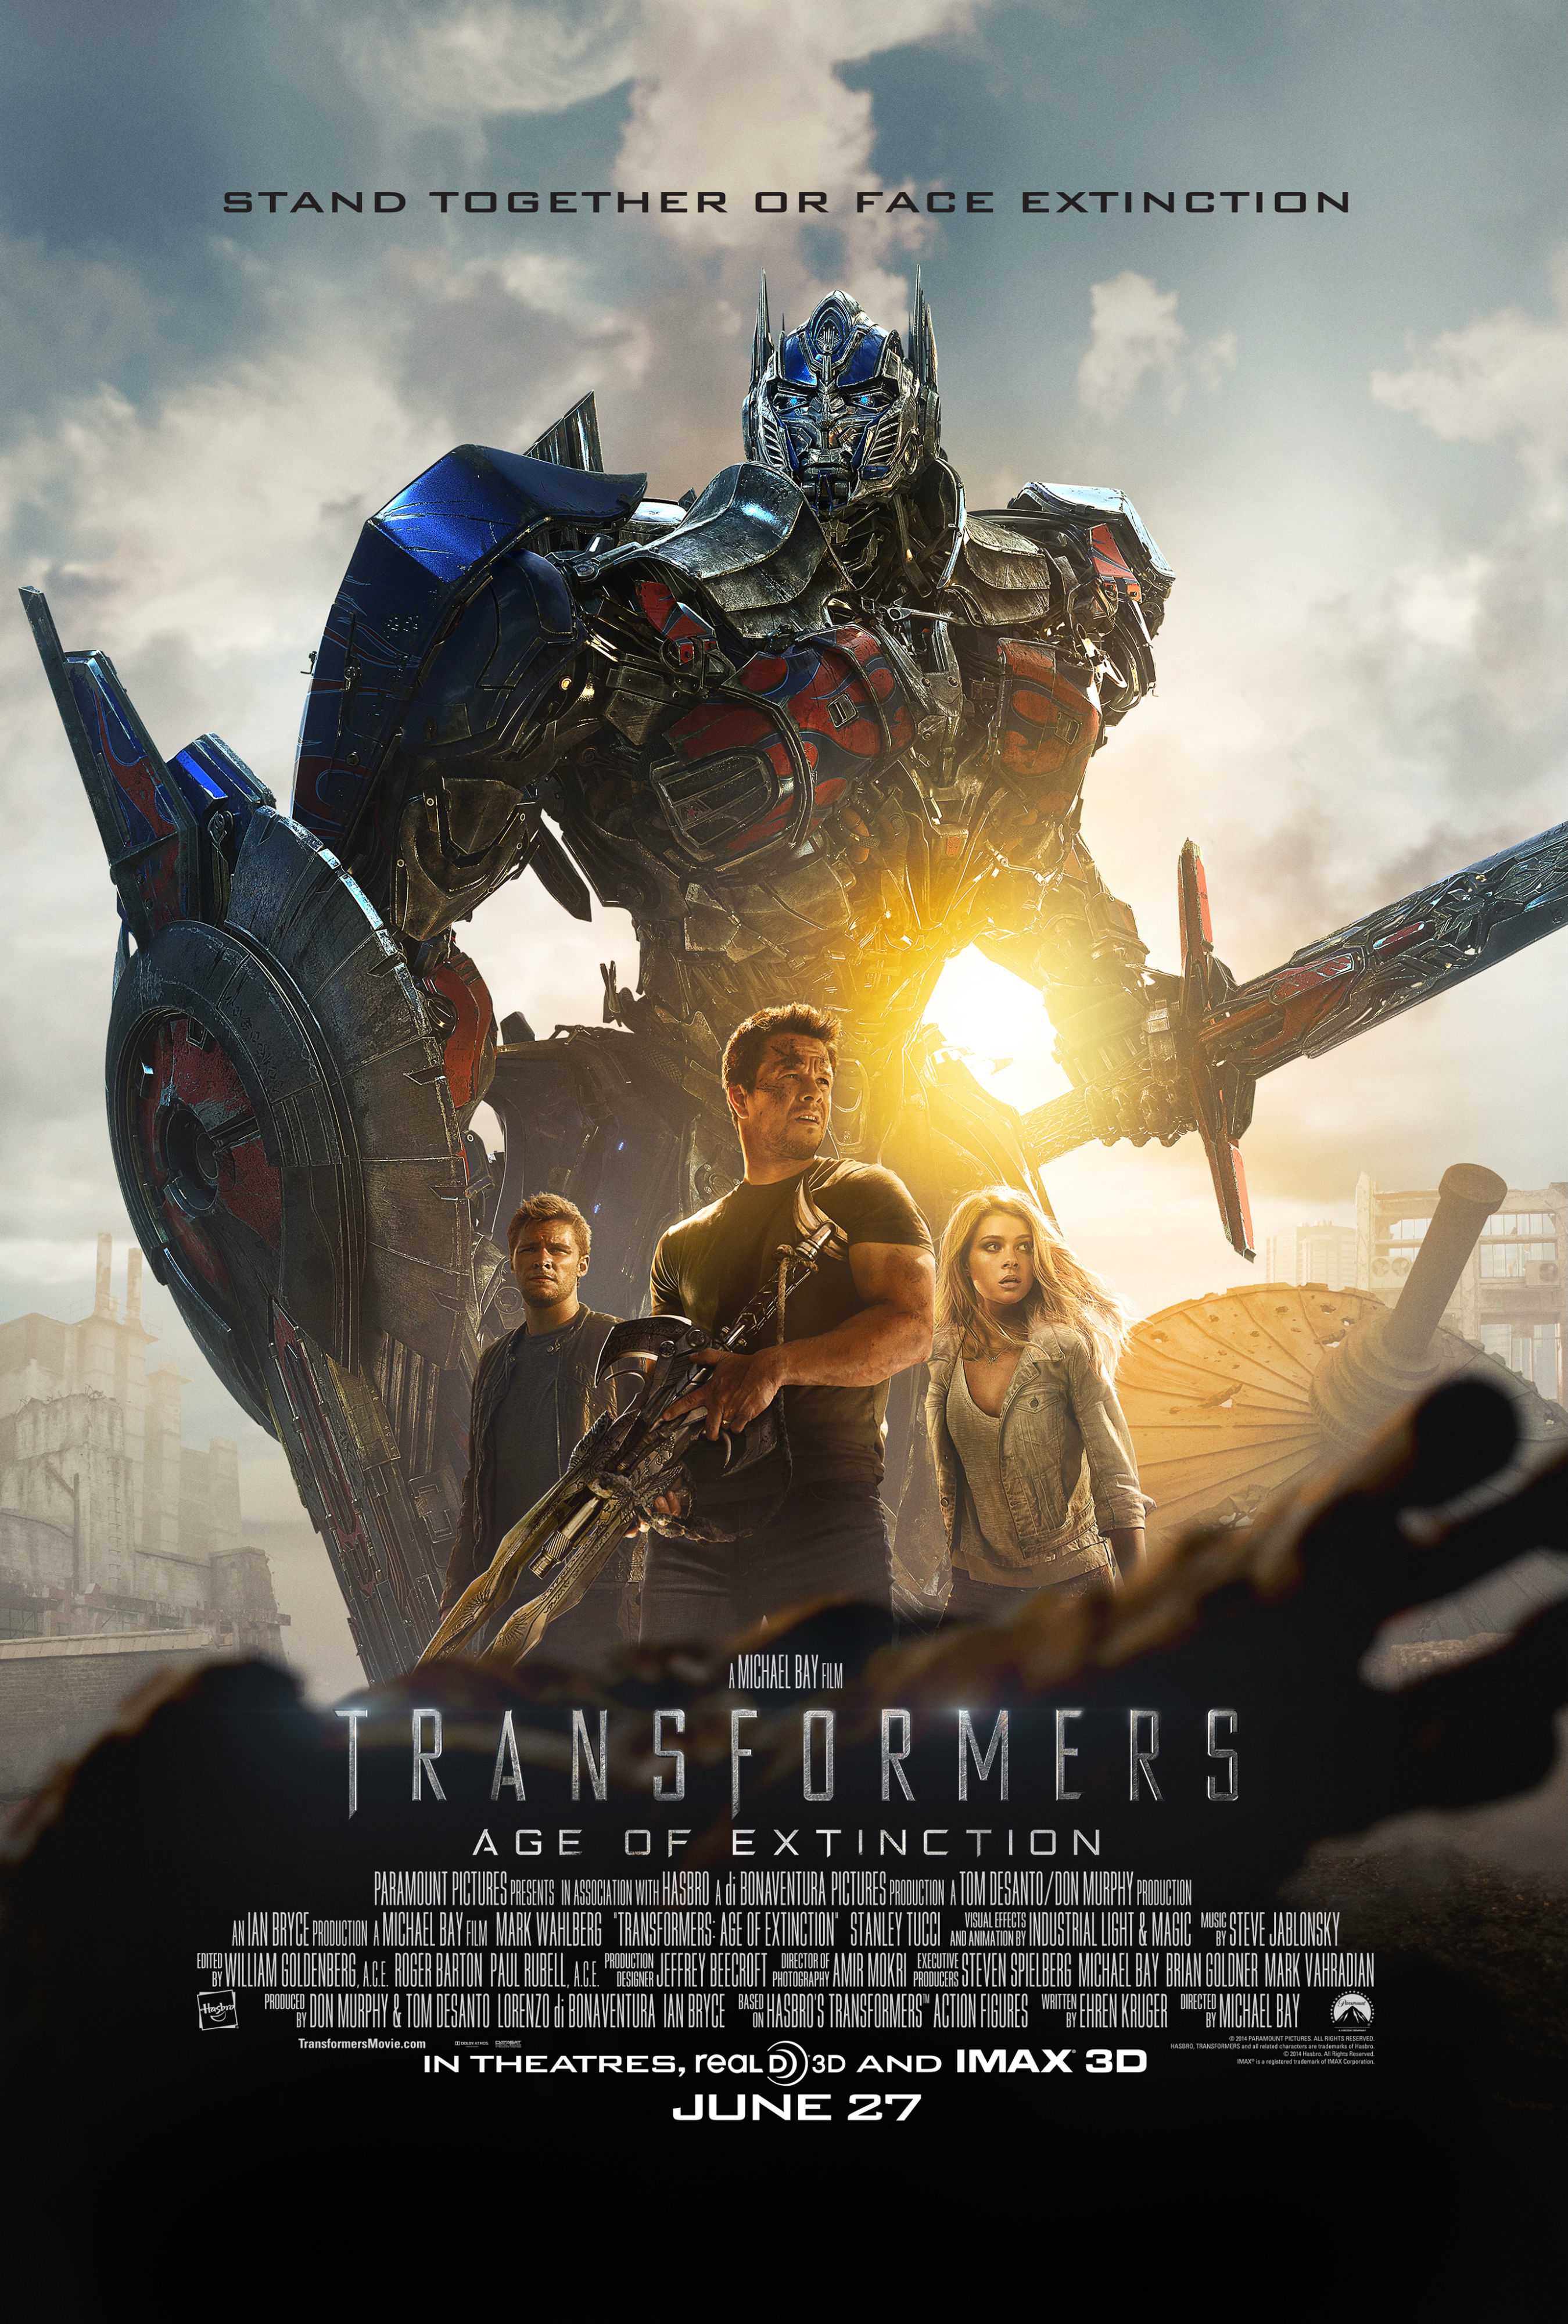 GEEK OUT! New TRANSFORMERS AGE OF EXTINCTION trailer and poster